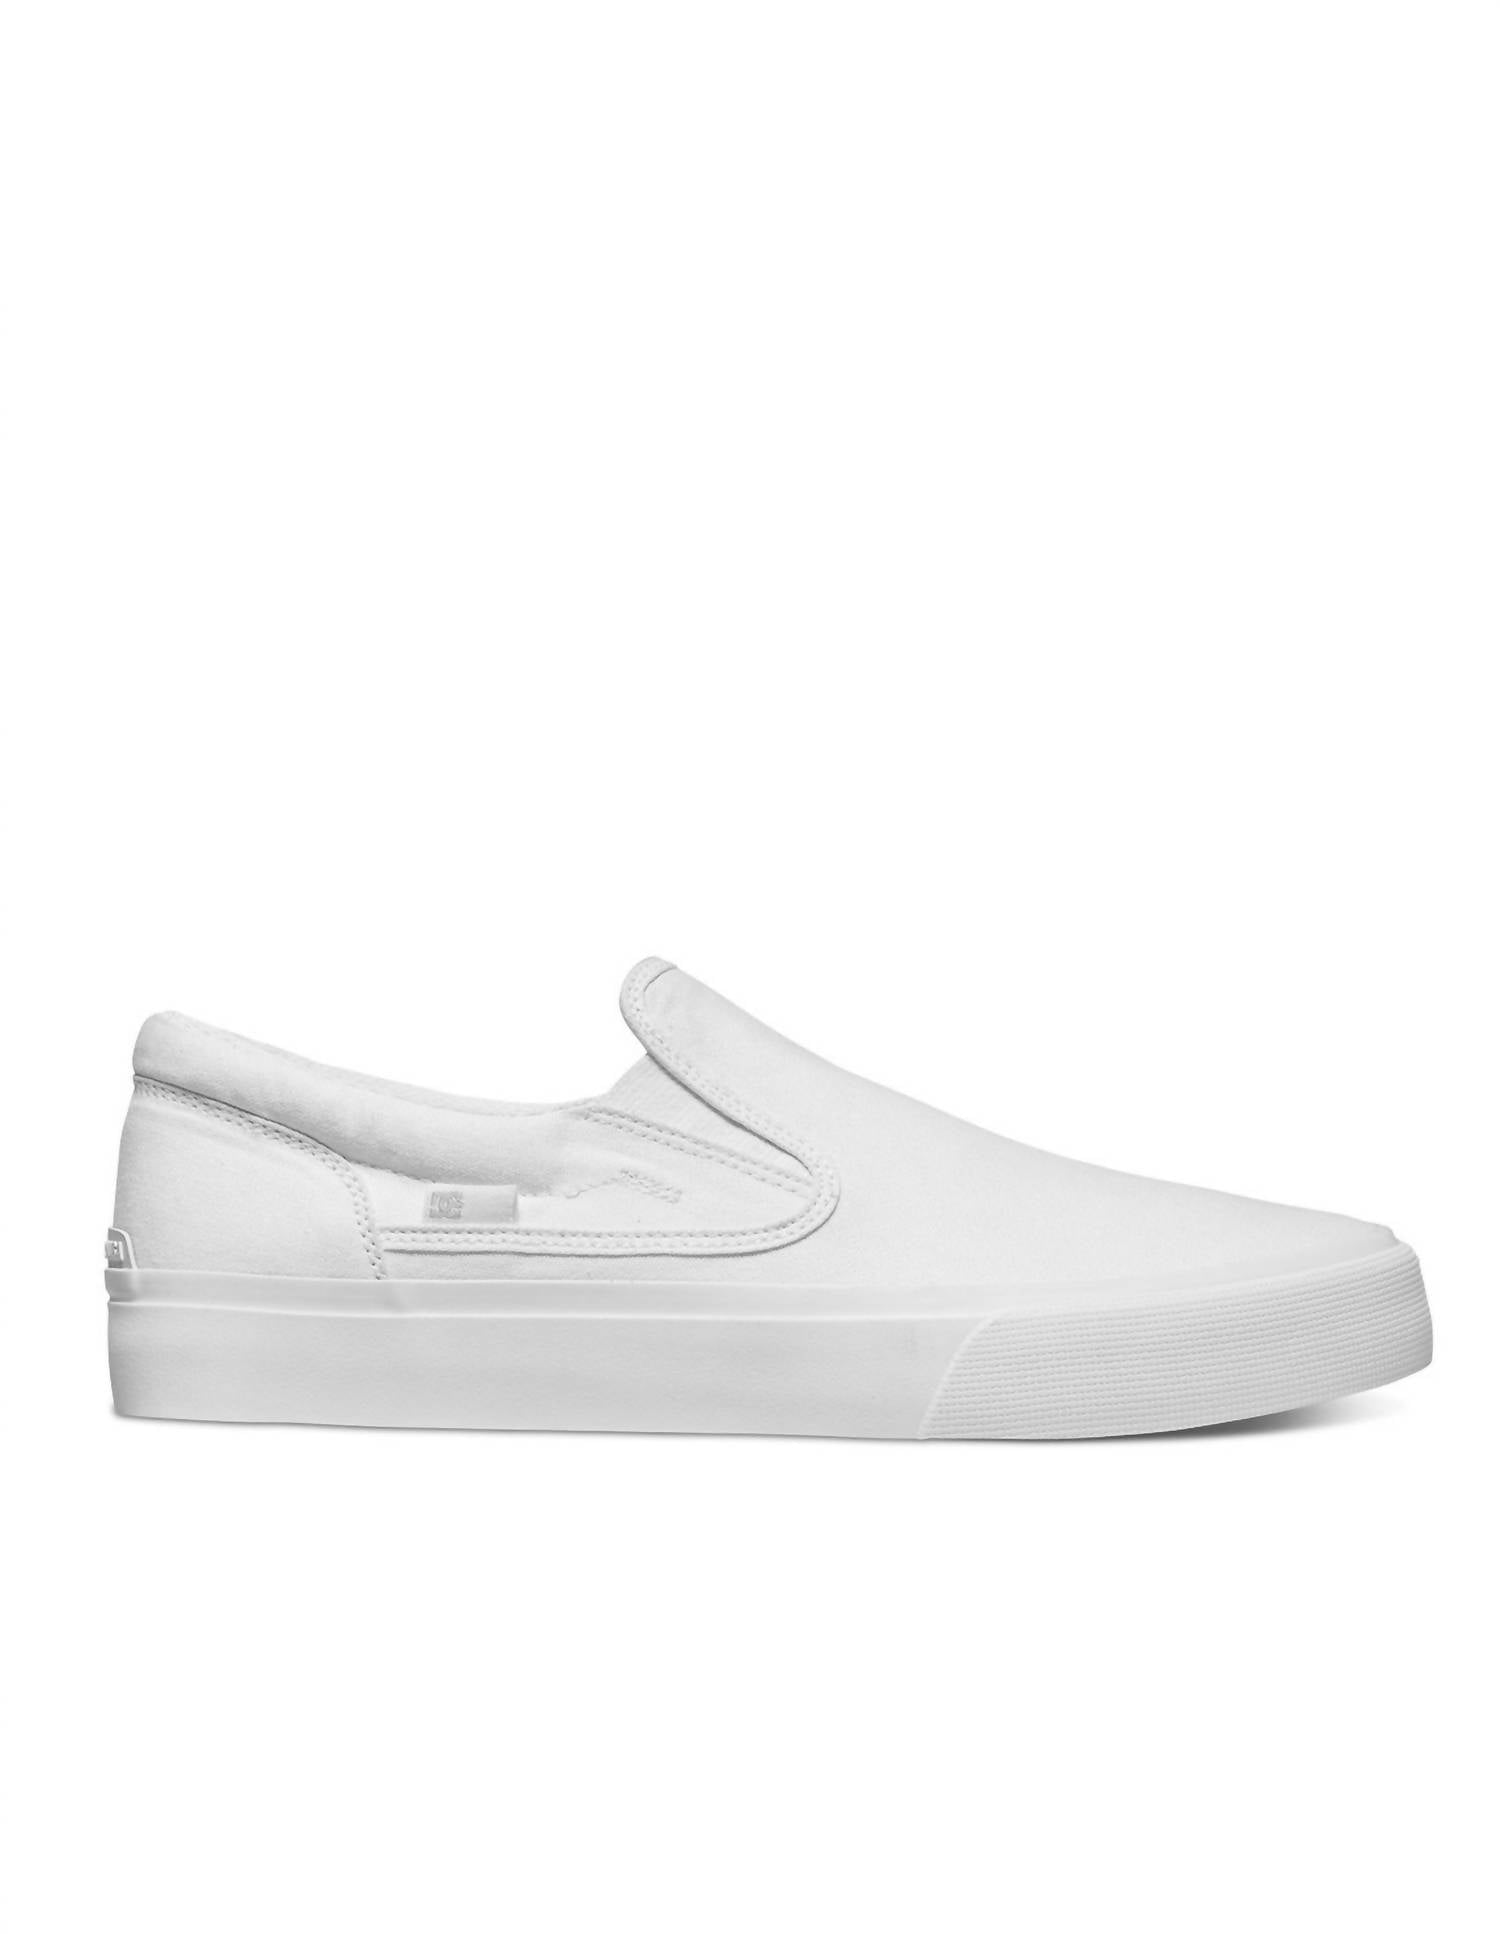 DC Shoes Men'S Trase Canvas Slip On Shoes in White/White - white - Size: US 5.5